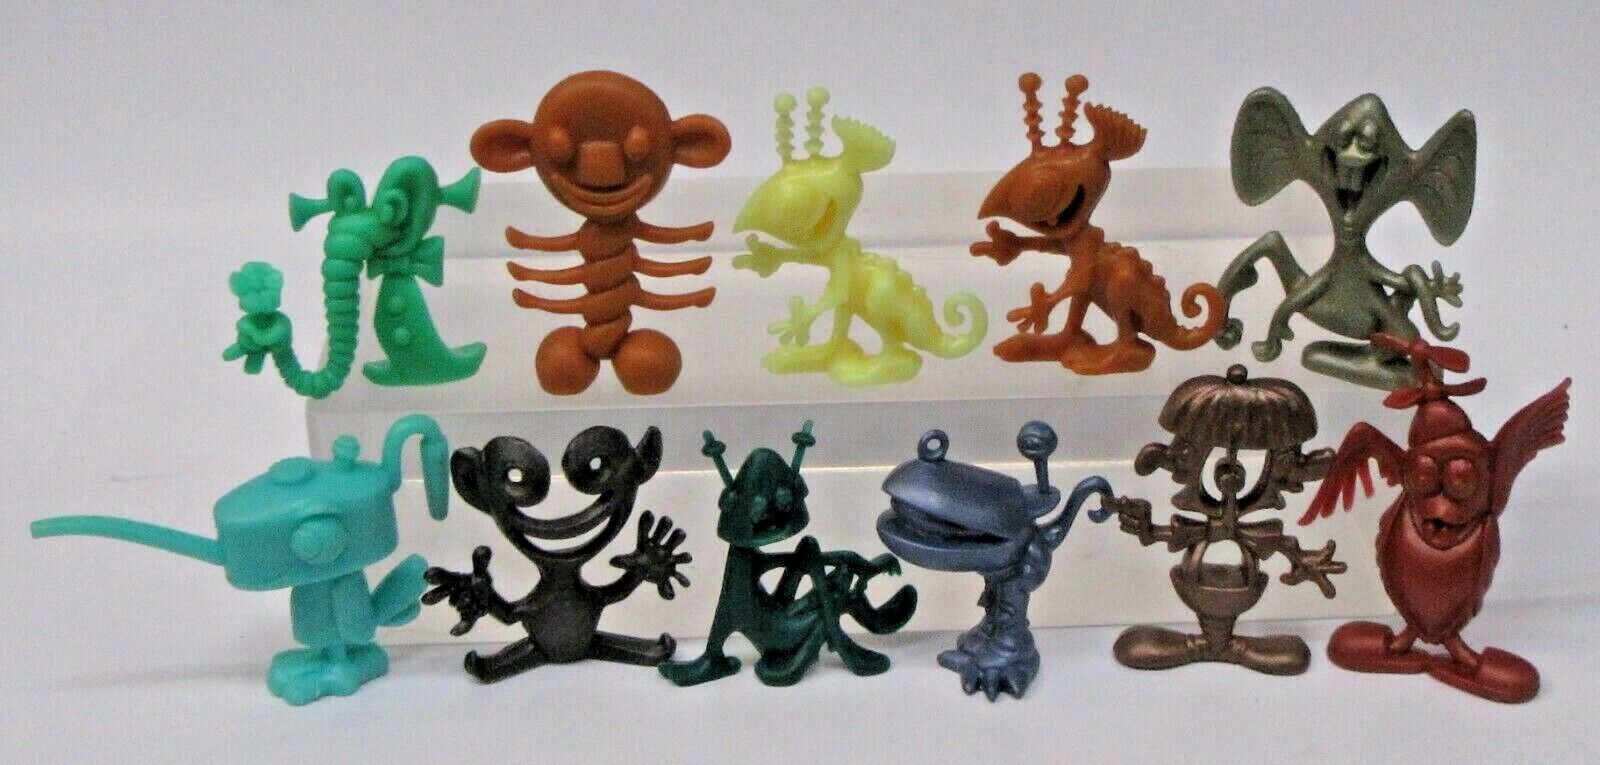 11 Different Mexican Cereal Premium Figures R&l Toolies Nits Critters Etc.